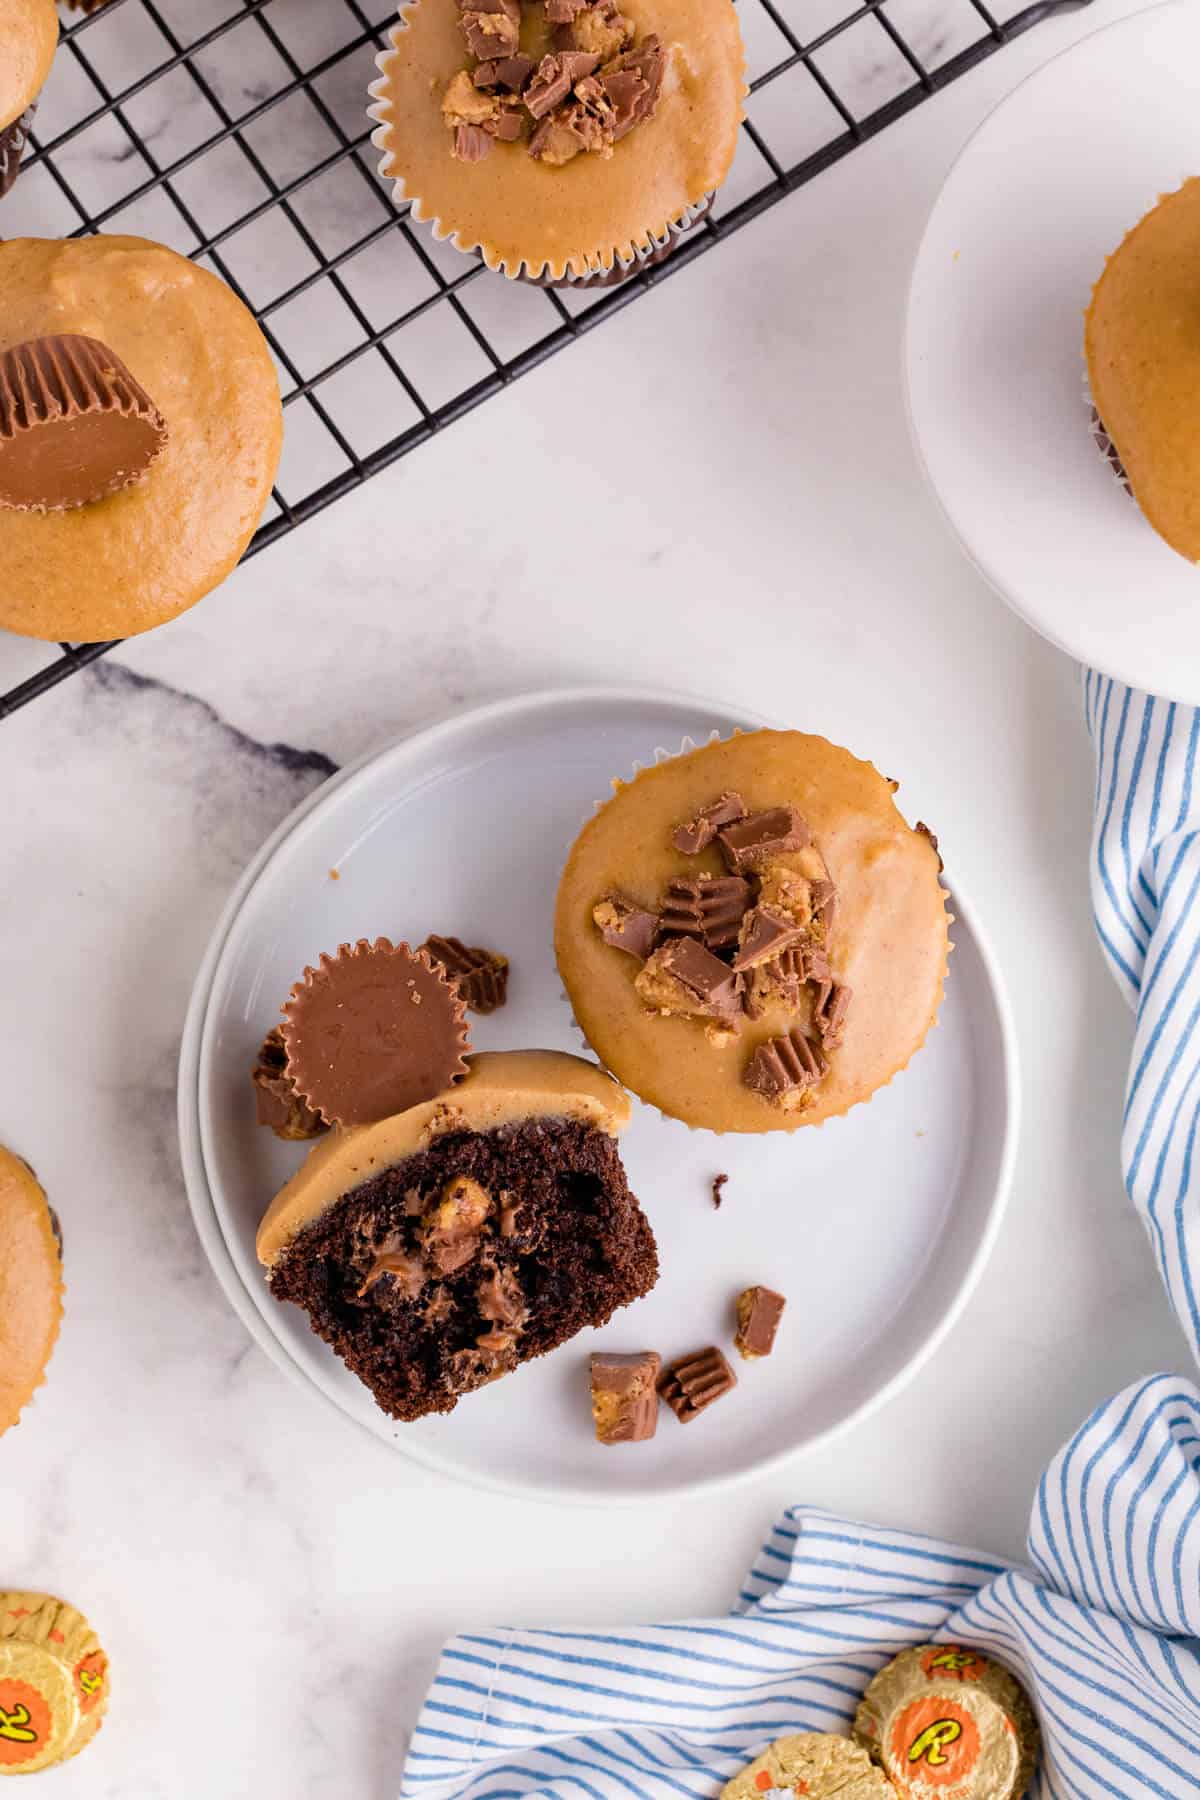 A Reese's Cupcake cut in half on a plate.